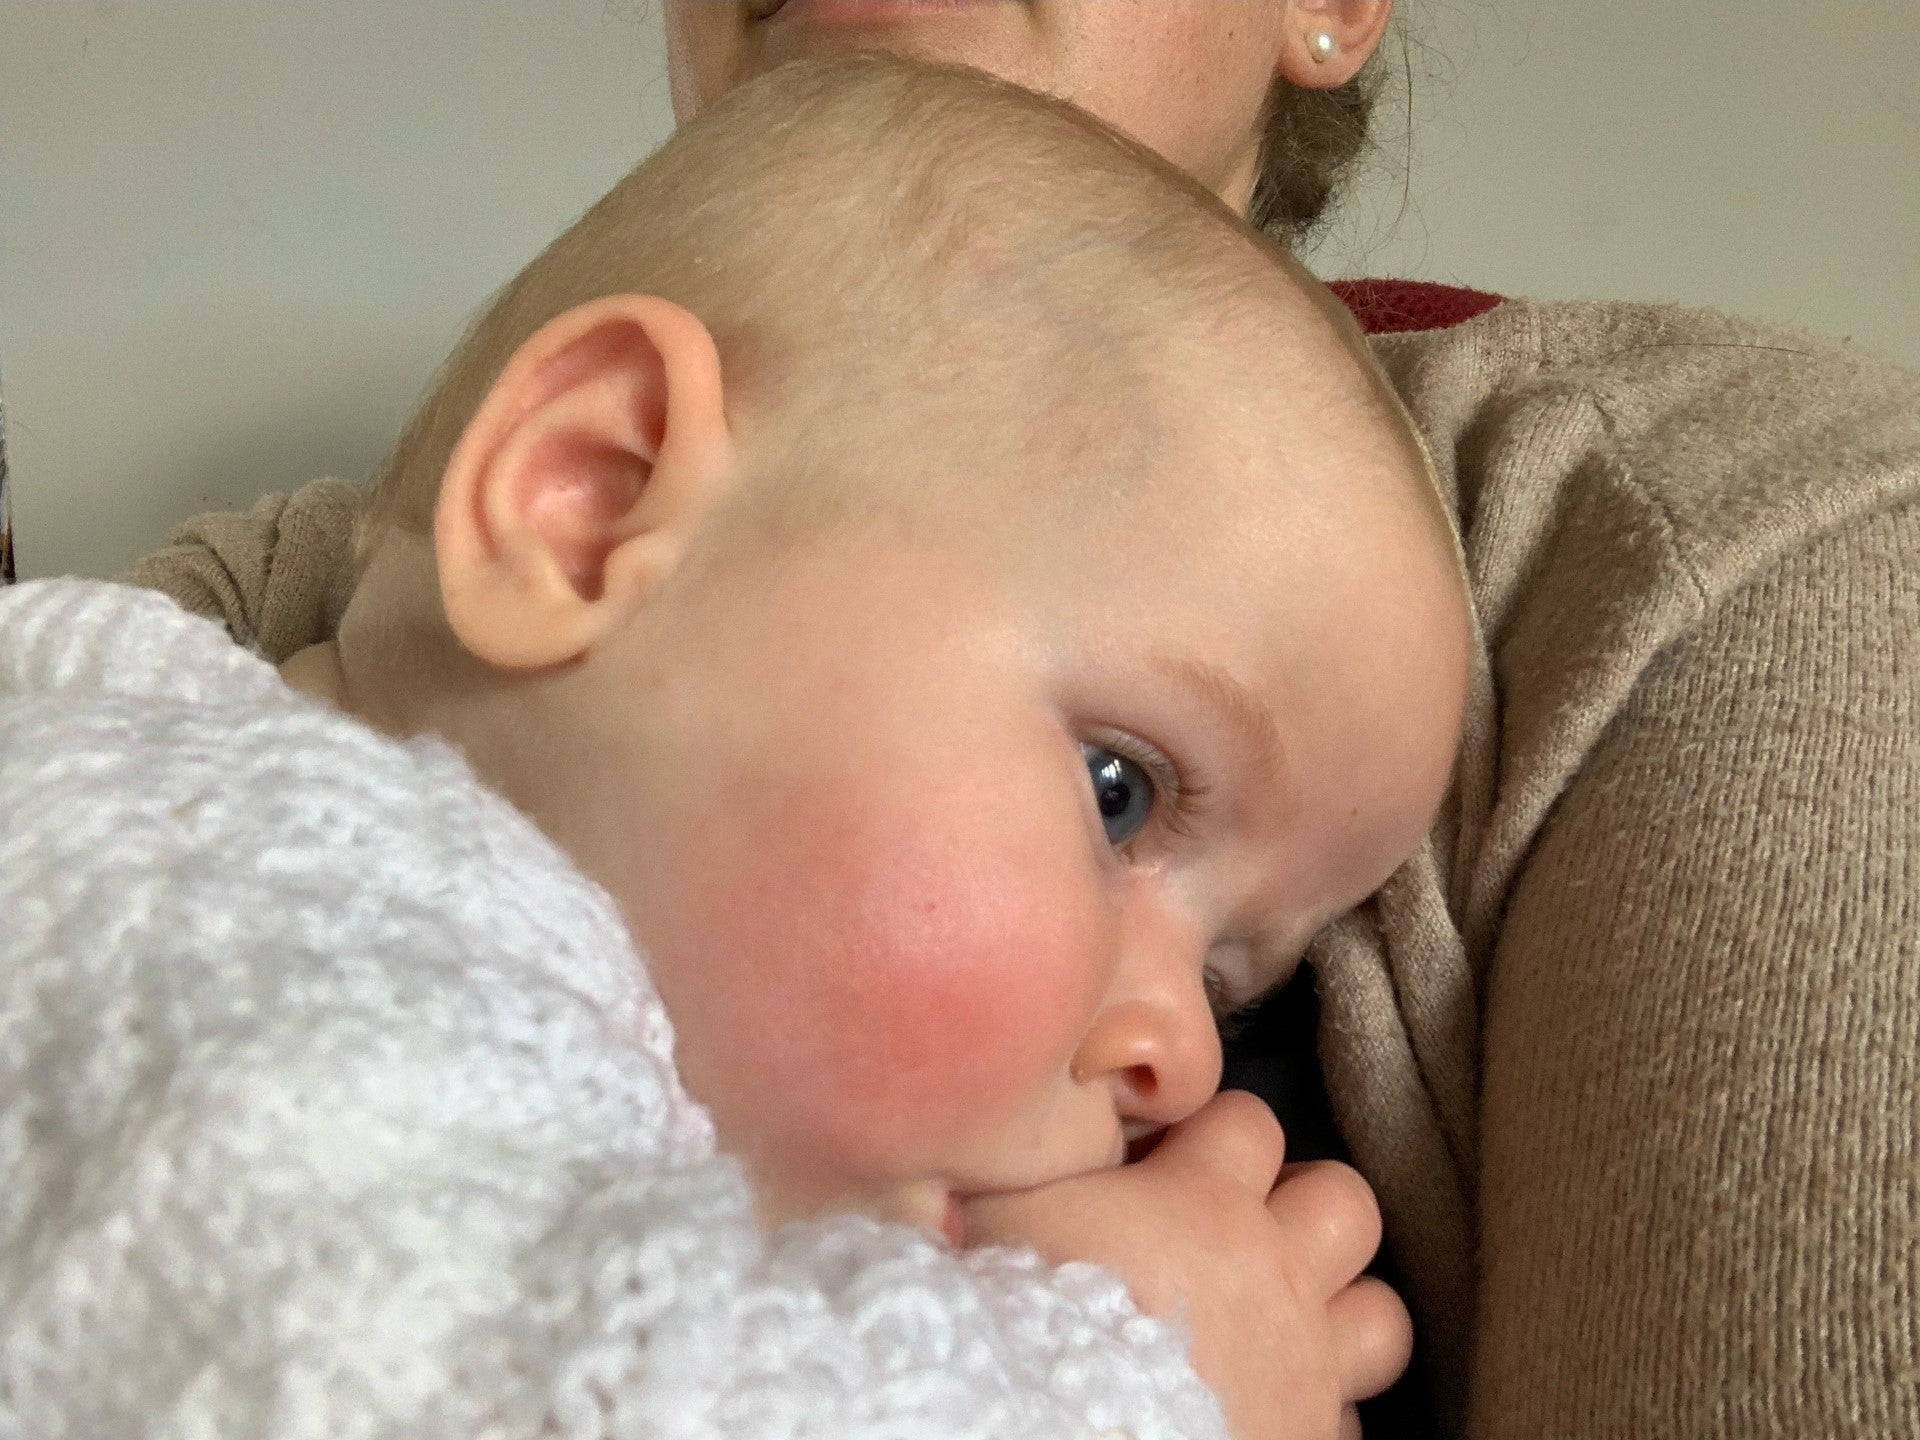 Iona Grace Buckingham was admitted to hospital with suspected bronchiolitis